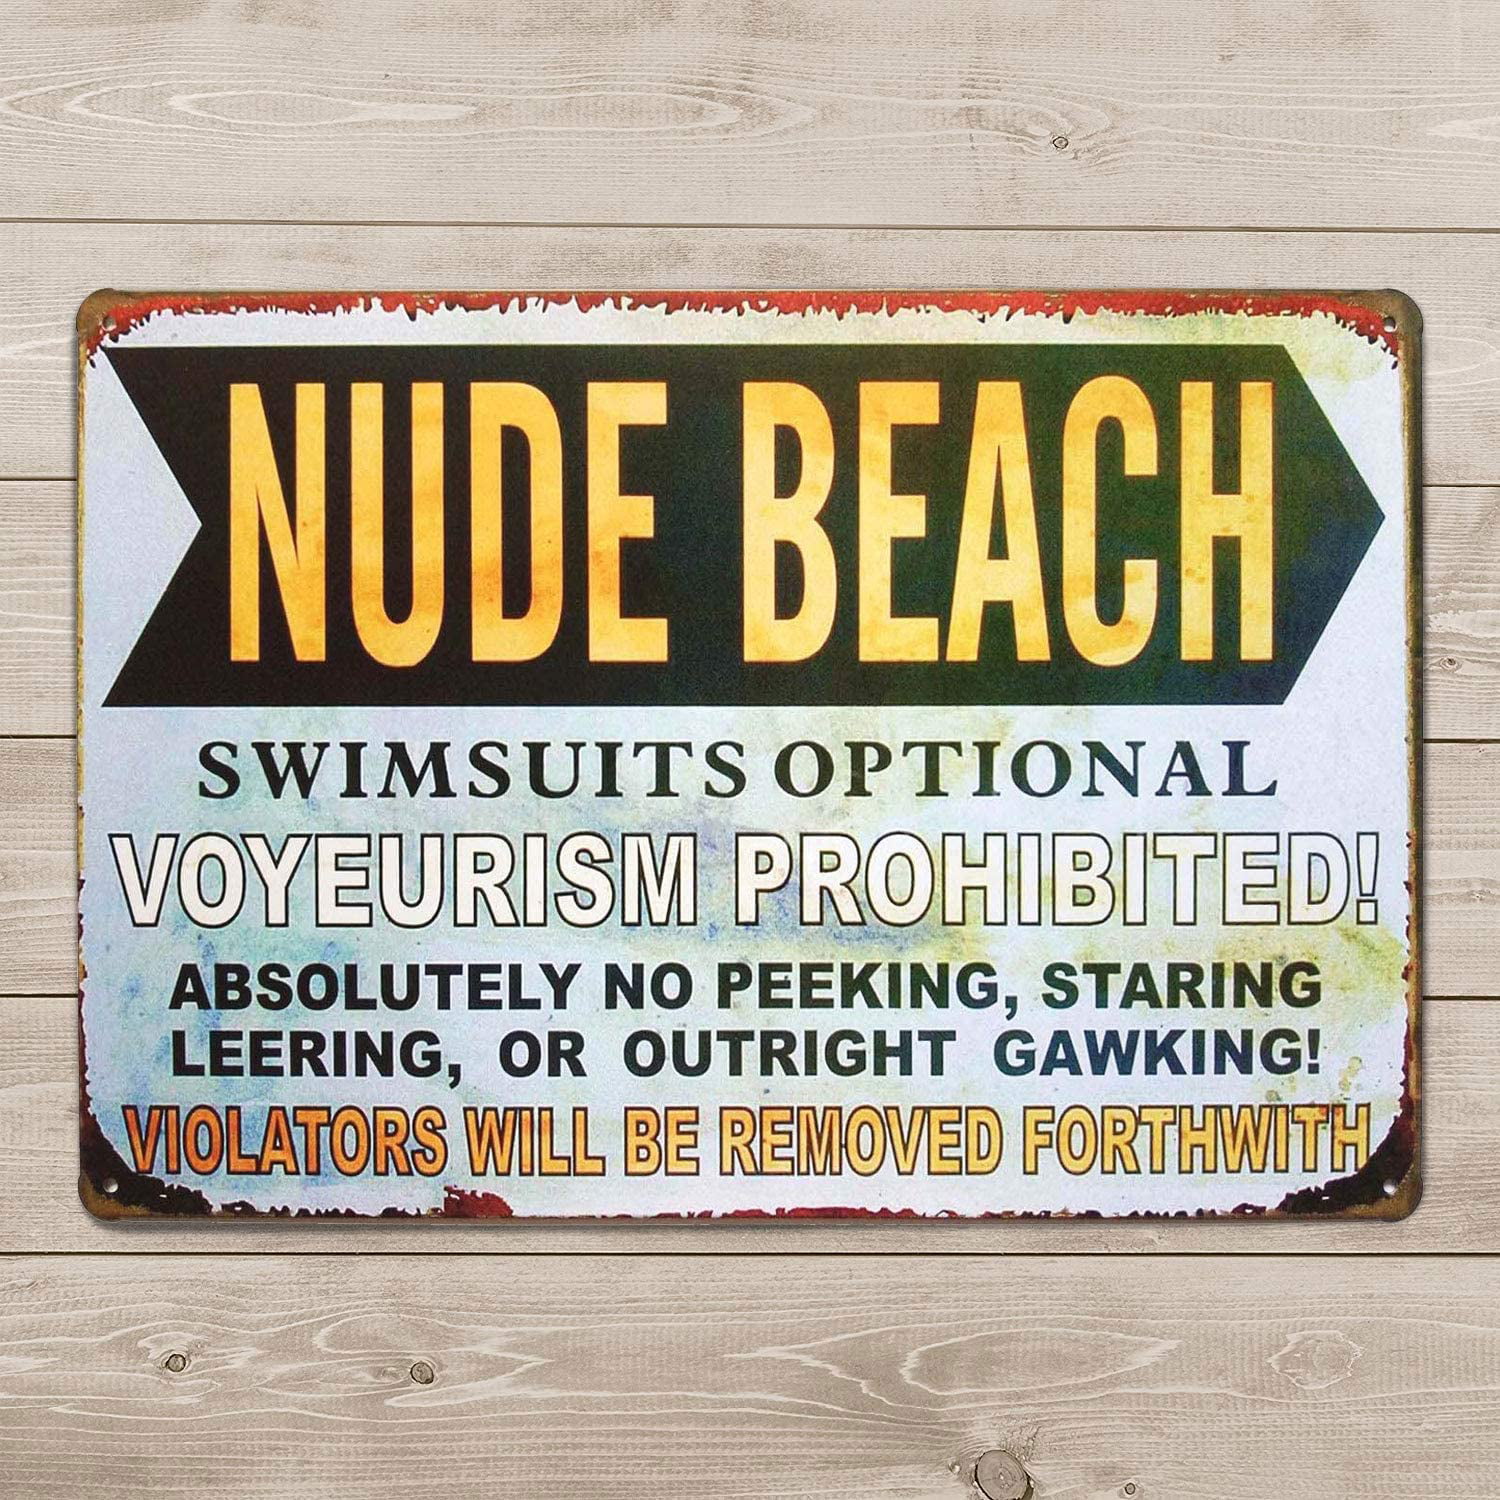 Nude Beach Swimsuits Optional Voyeurism Prohibited Metal Tin Sign Vintage Plaque Home Wall Decor, 8x12 Inches